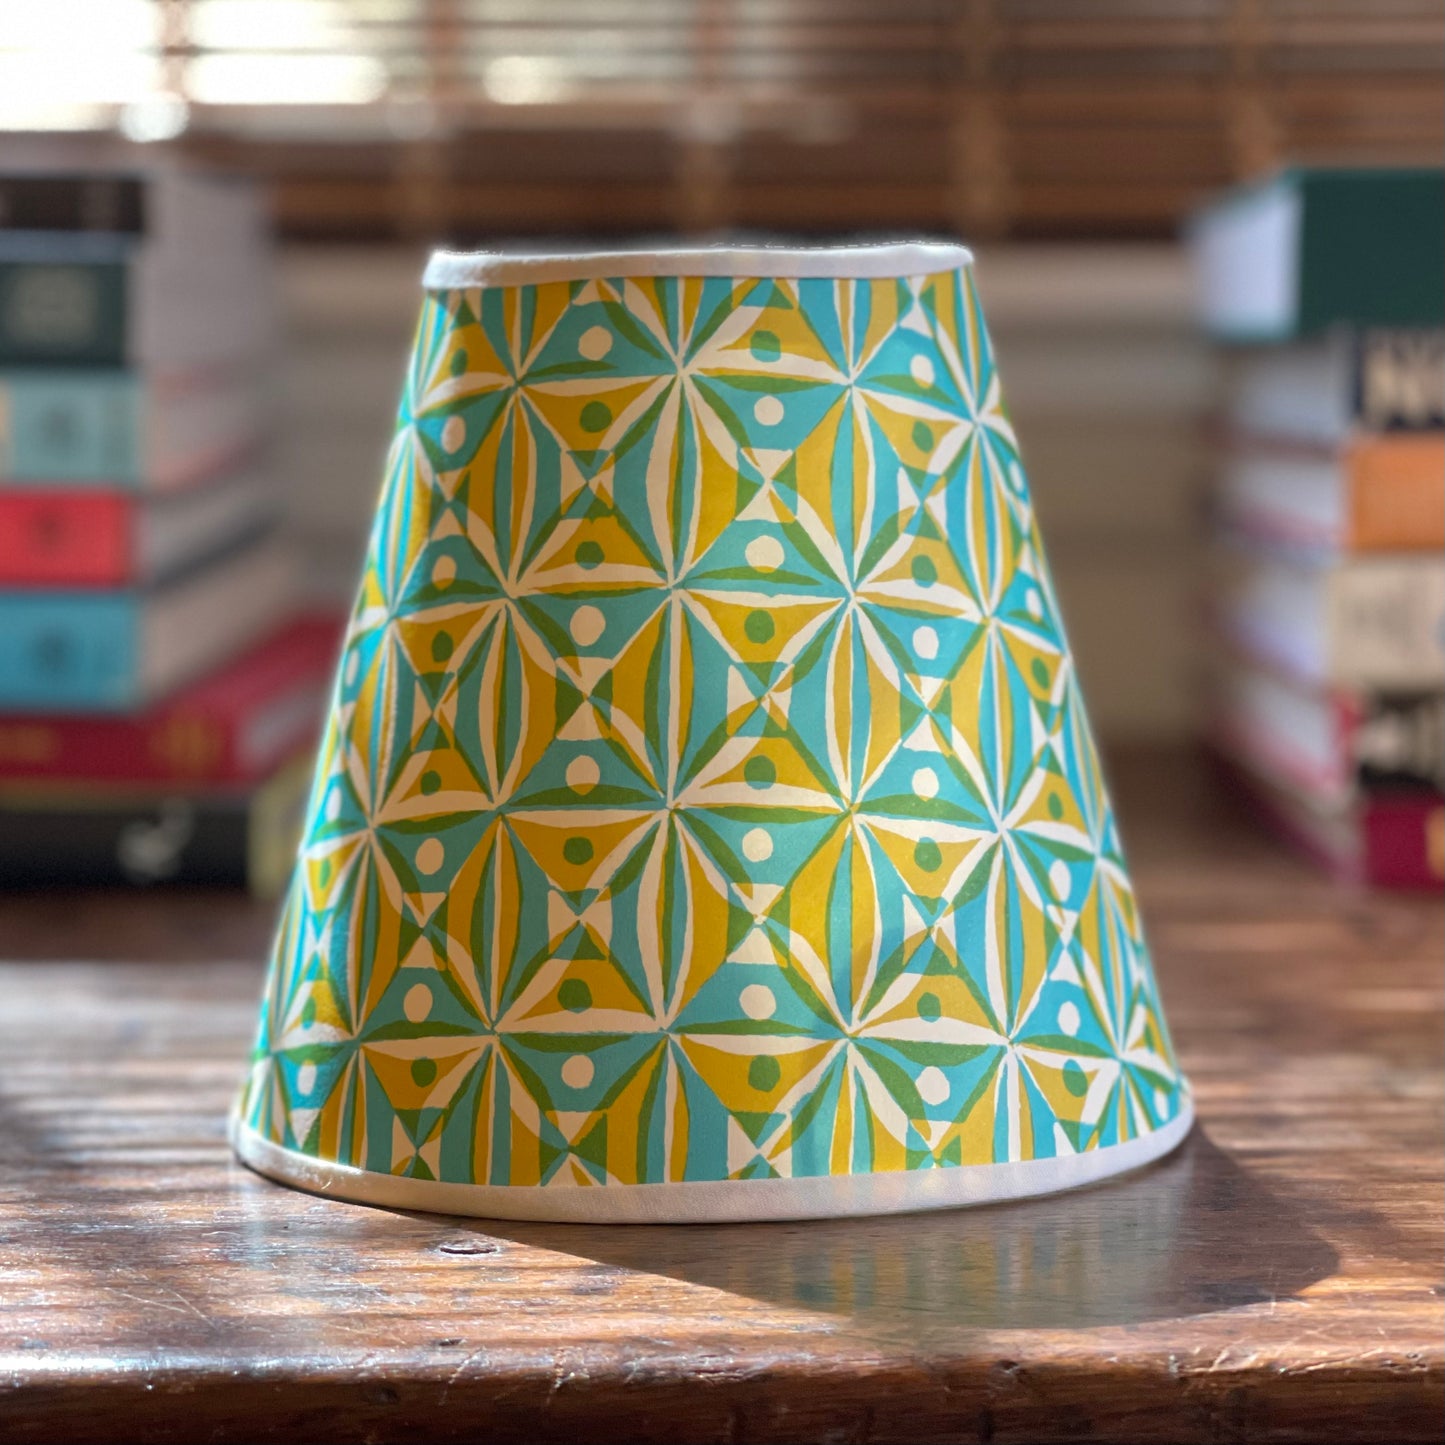 Small Clip-On Lampshade. Patterned Paper from England. "Kaleidoscope" Yellow and Turquoise. White Trim.